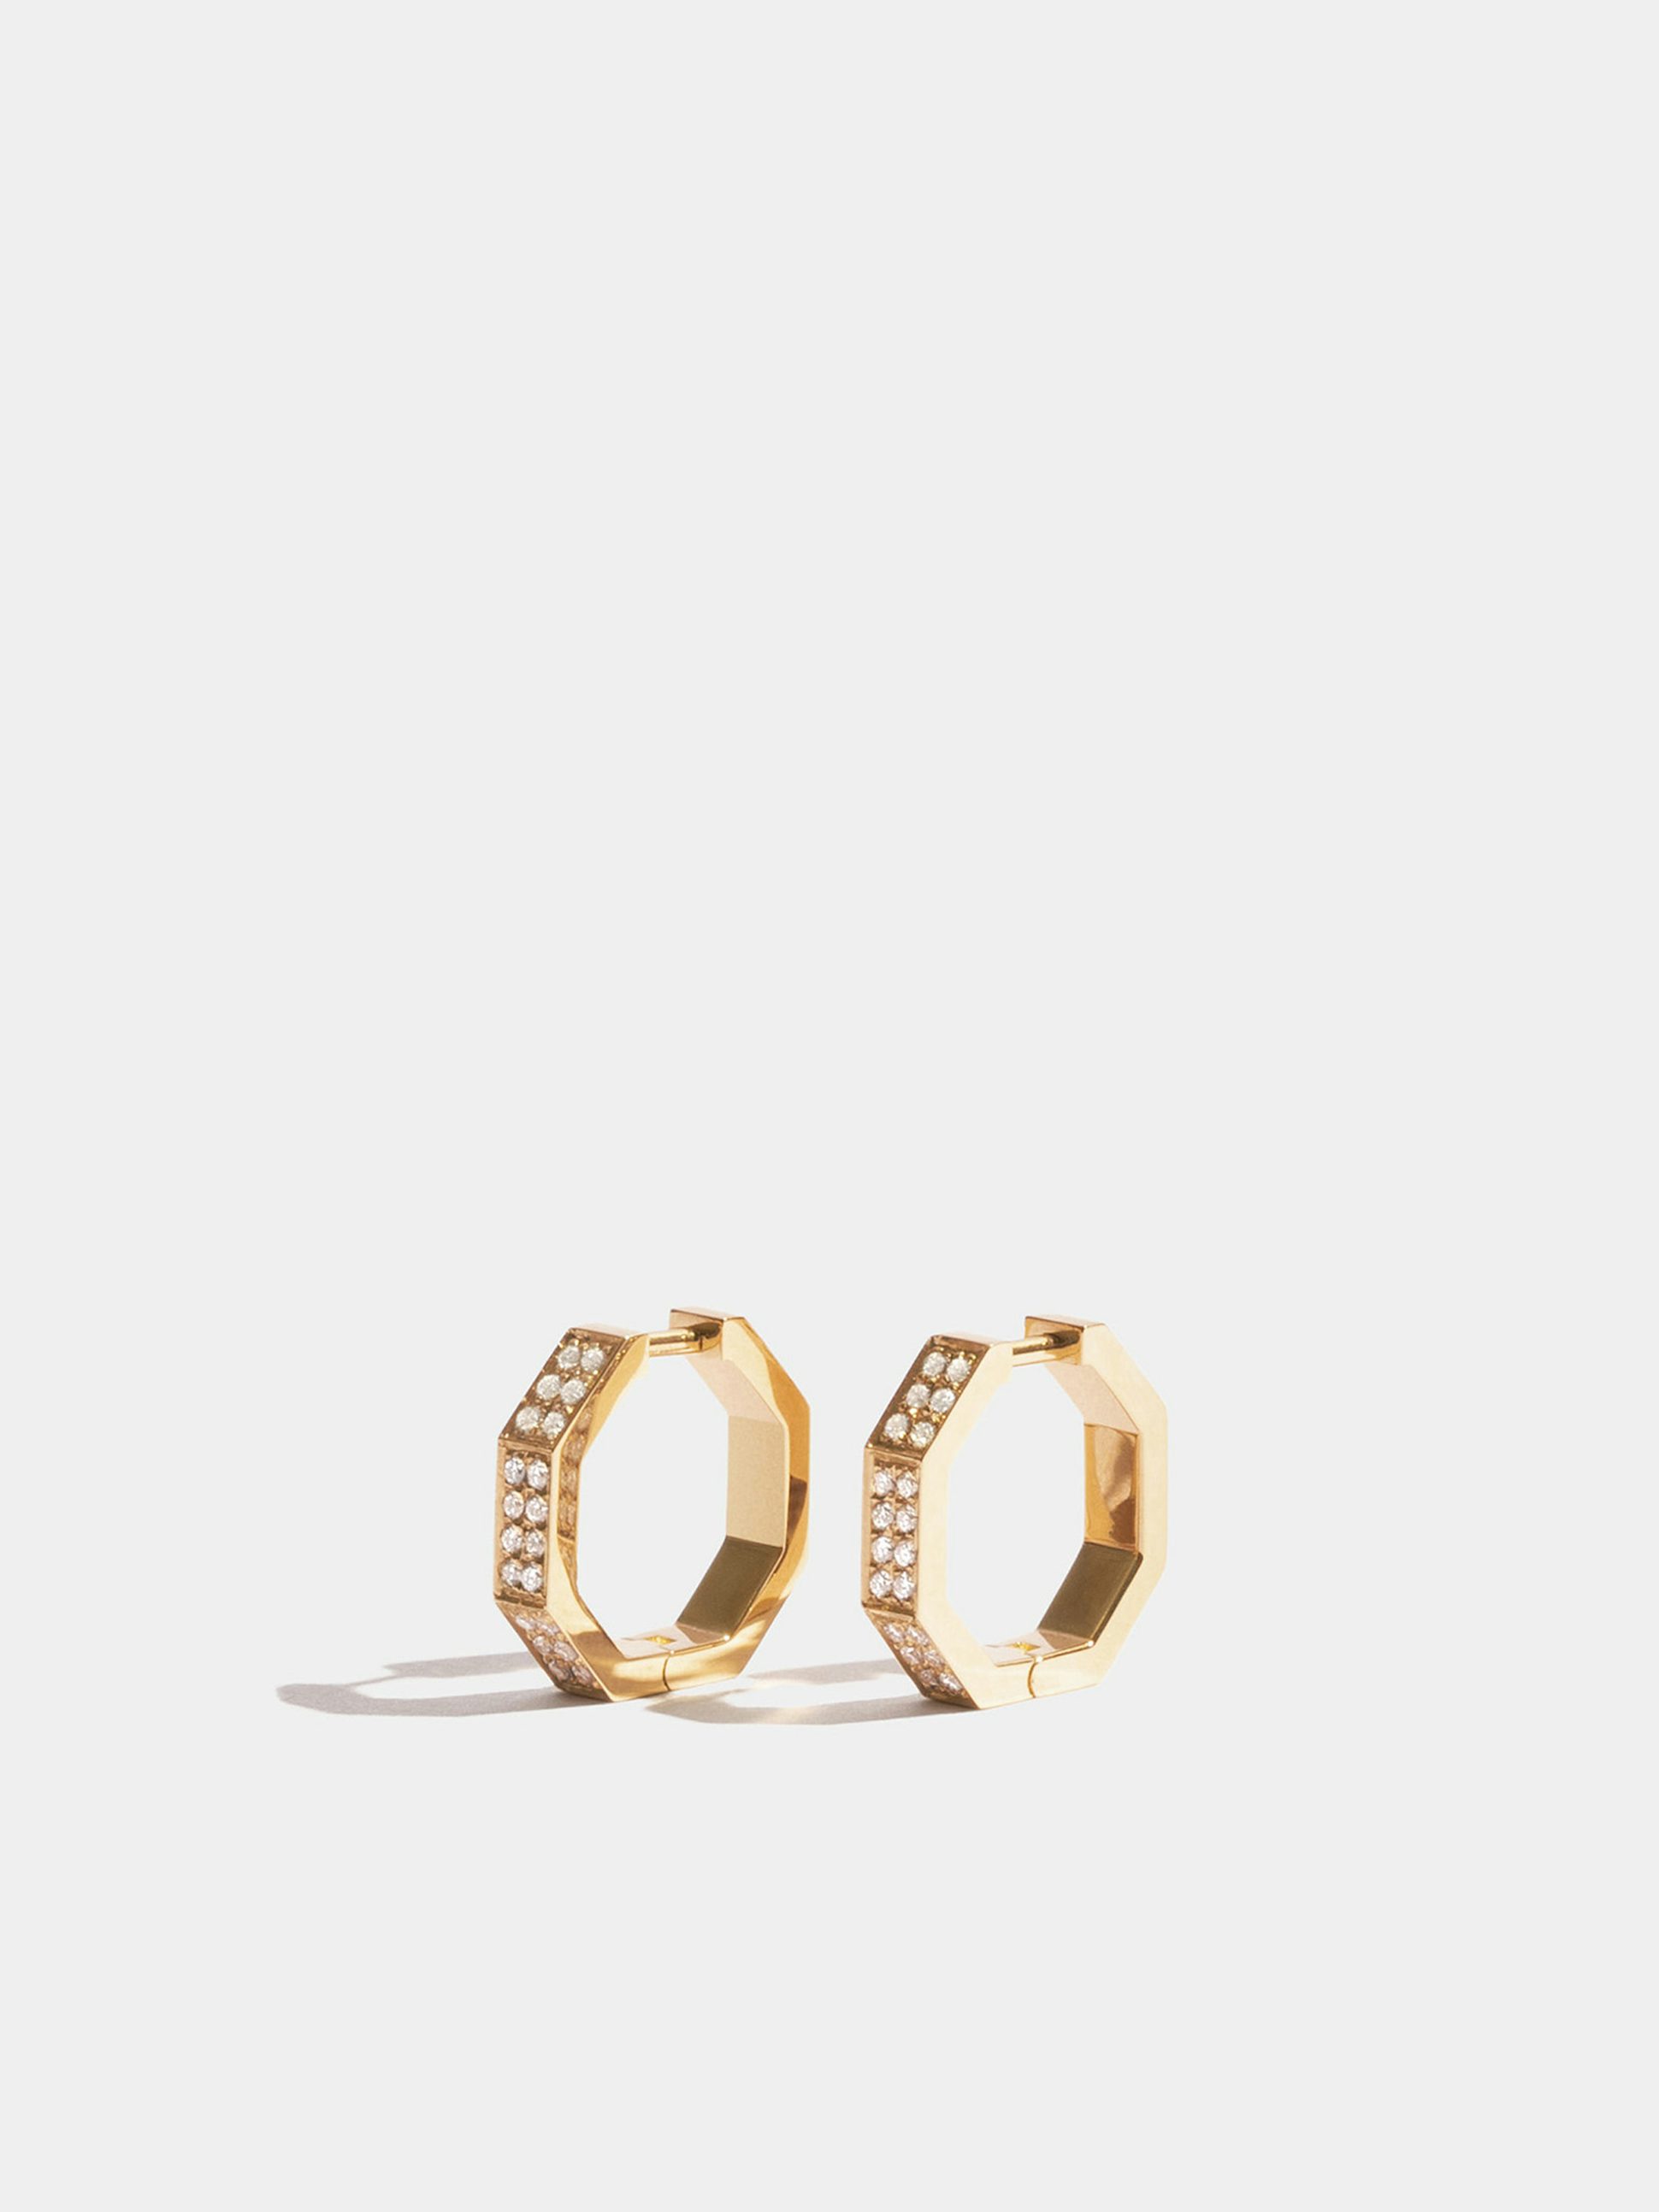 Octogone 13mm earrings in 18k Fairmined ethical yellow gold, paved with lab-grown diamonds, the pair.